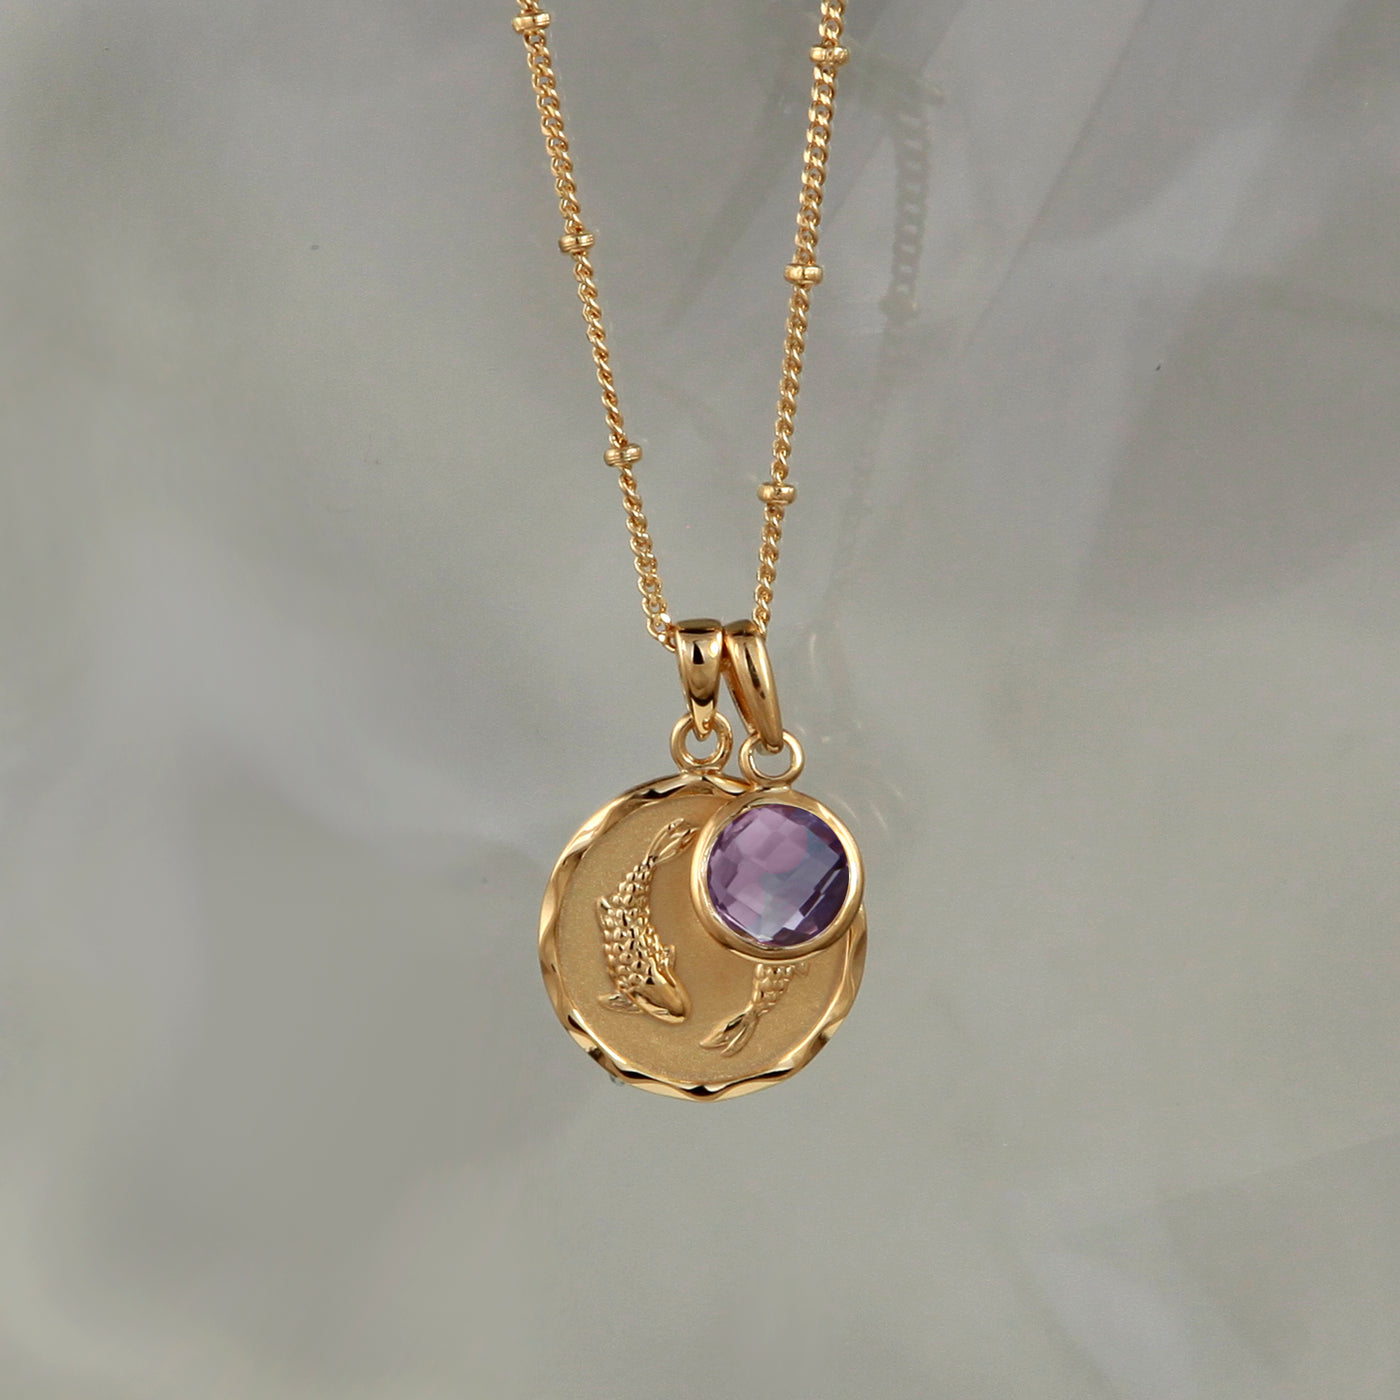 Gold Zodiac Necklace- Pisces with Birthstone